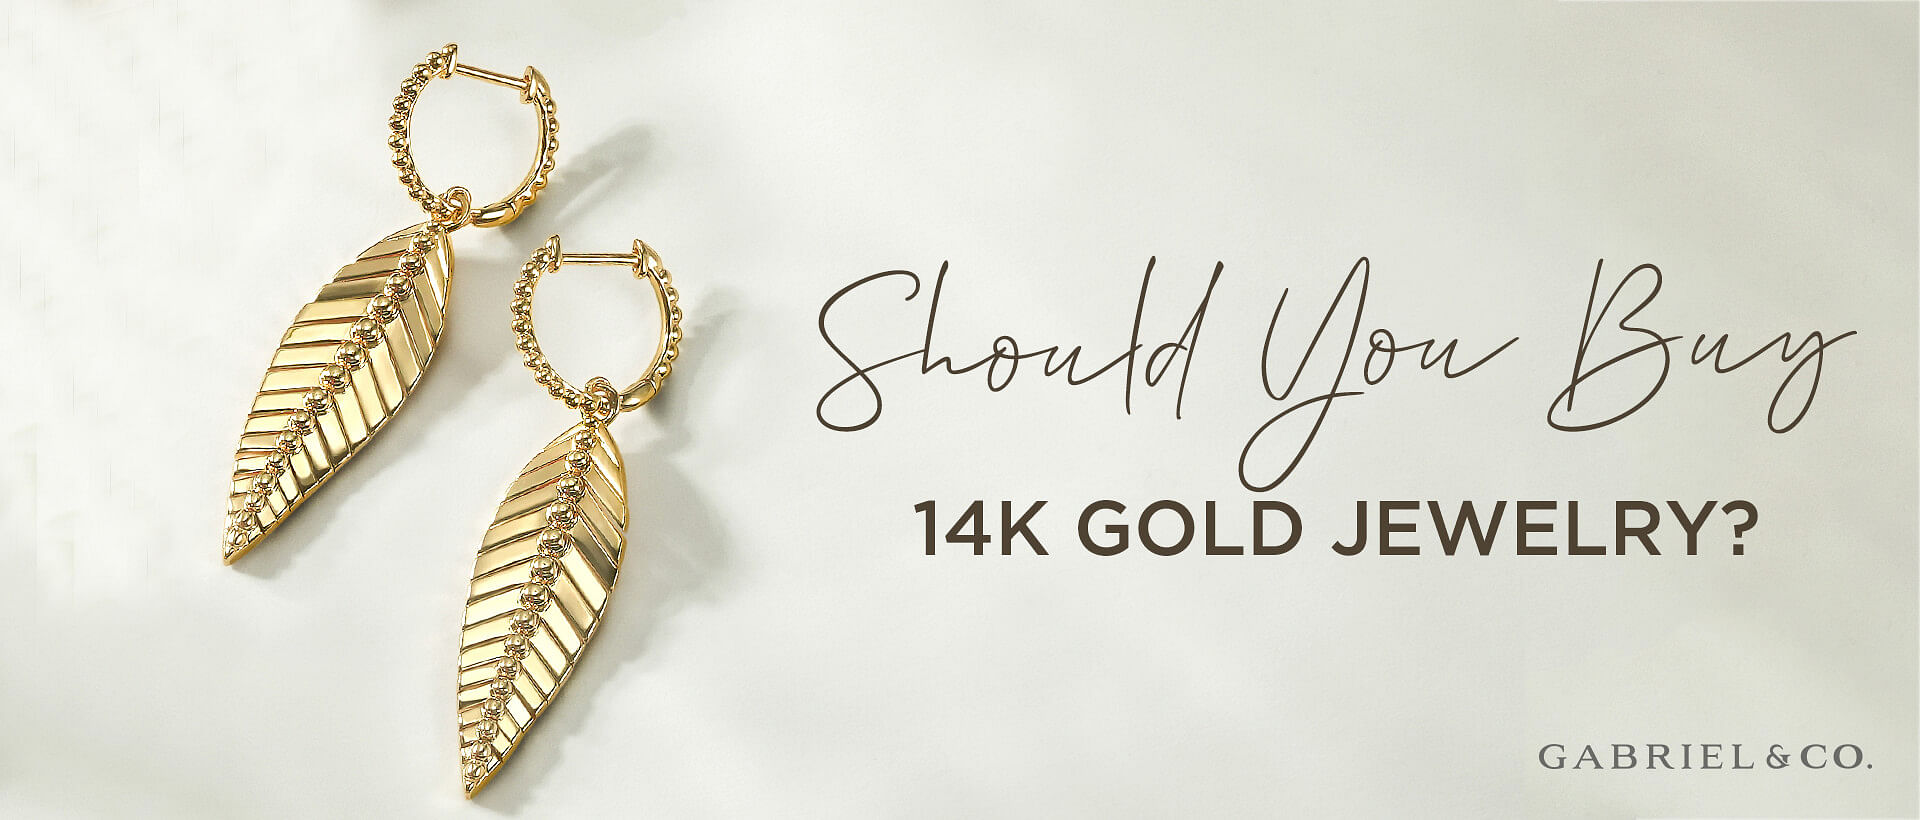 How to make fake gold jewelry less yellow